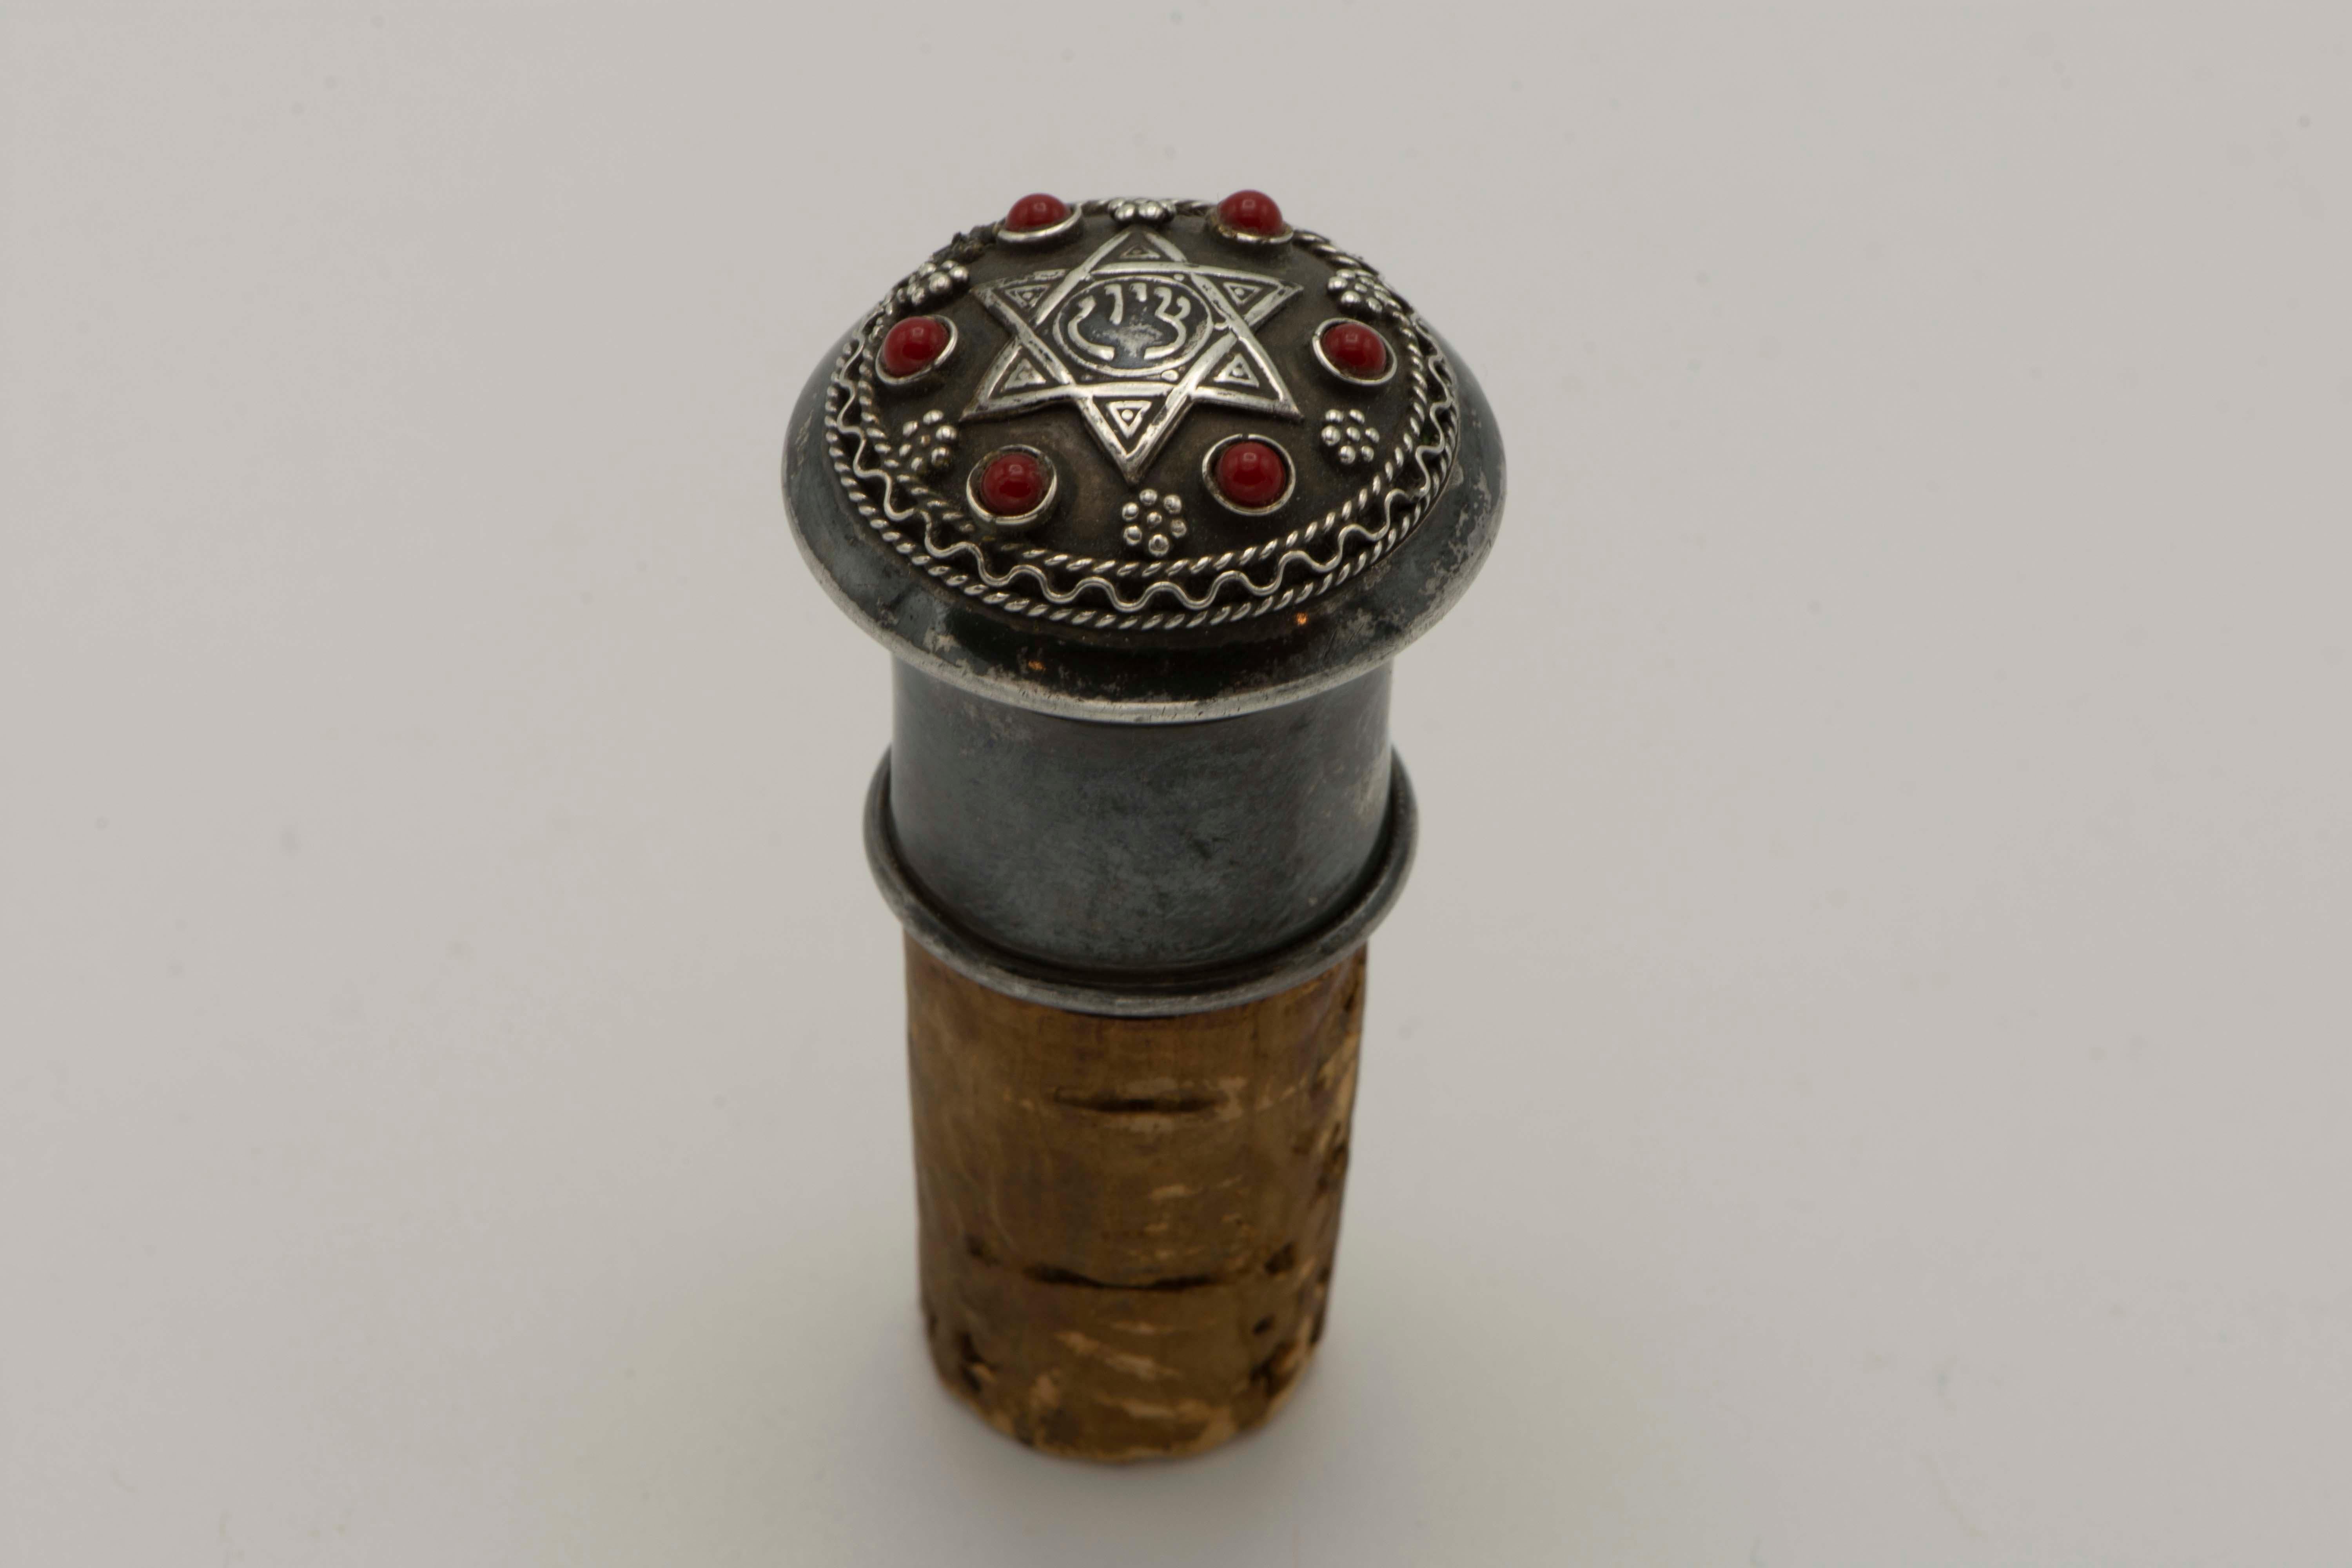 Silver wine bottle stopper by Bezalel school Jerusalem, circa 1920.
The top is decorated with silver Star of David with the hebrew word 